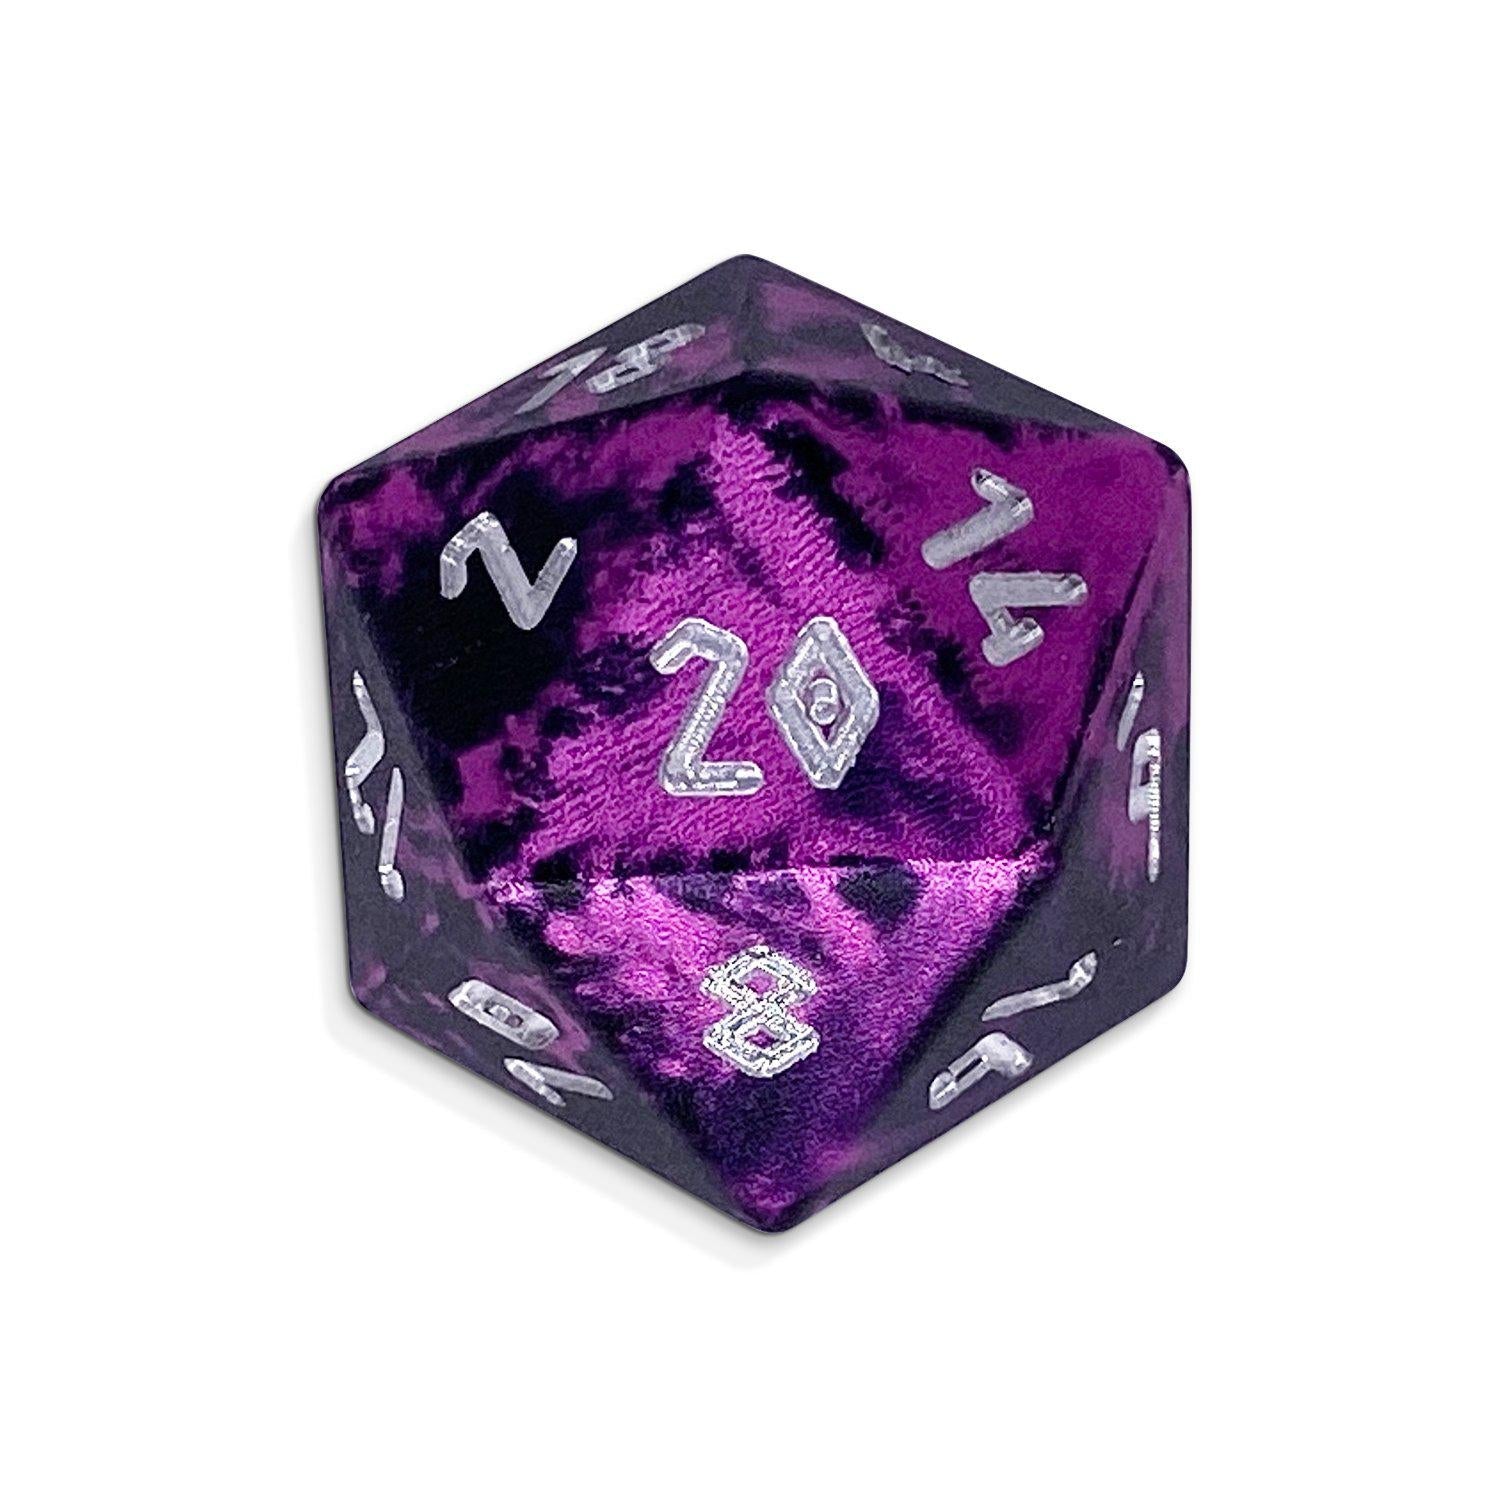 Single Wondrous Dice® D20 in Eldritch by Norse Foundry 6063 Aircraft Grade Aluminum - NOR 02398